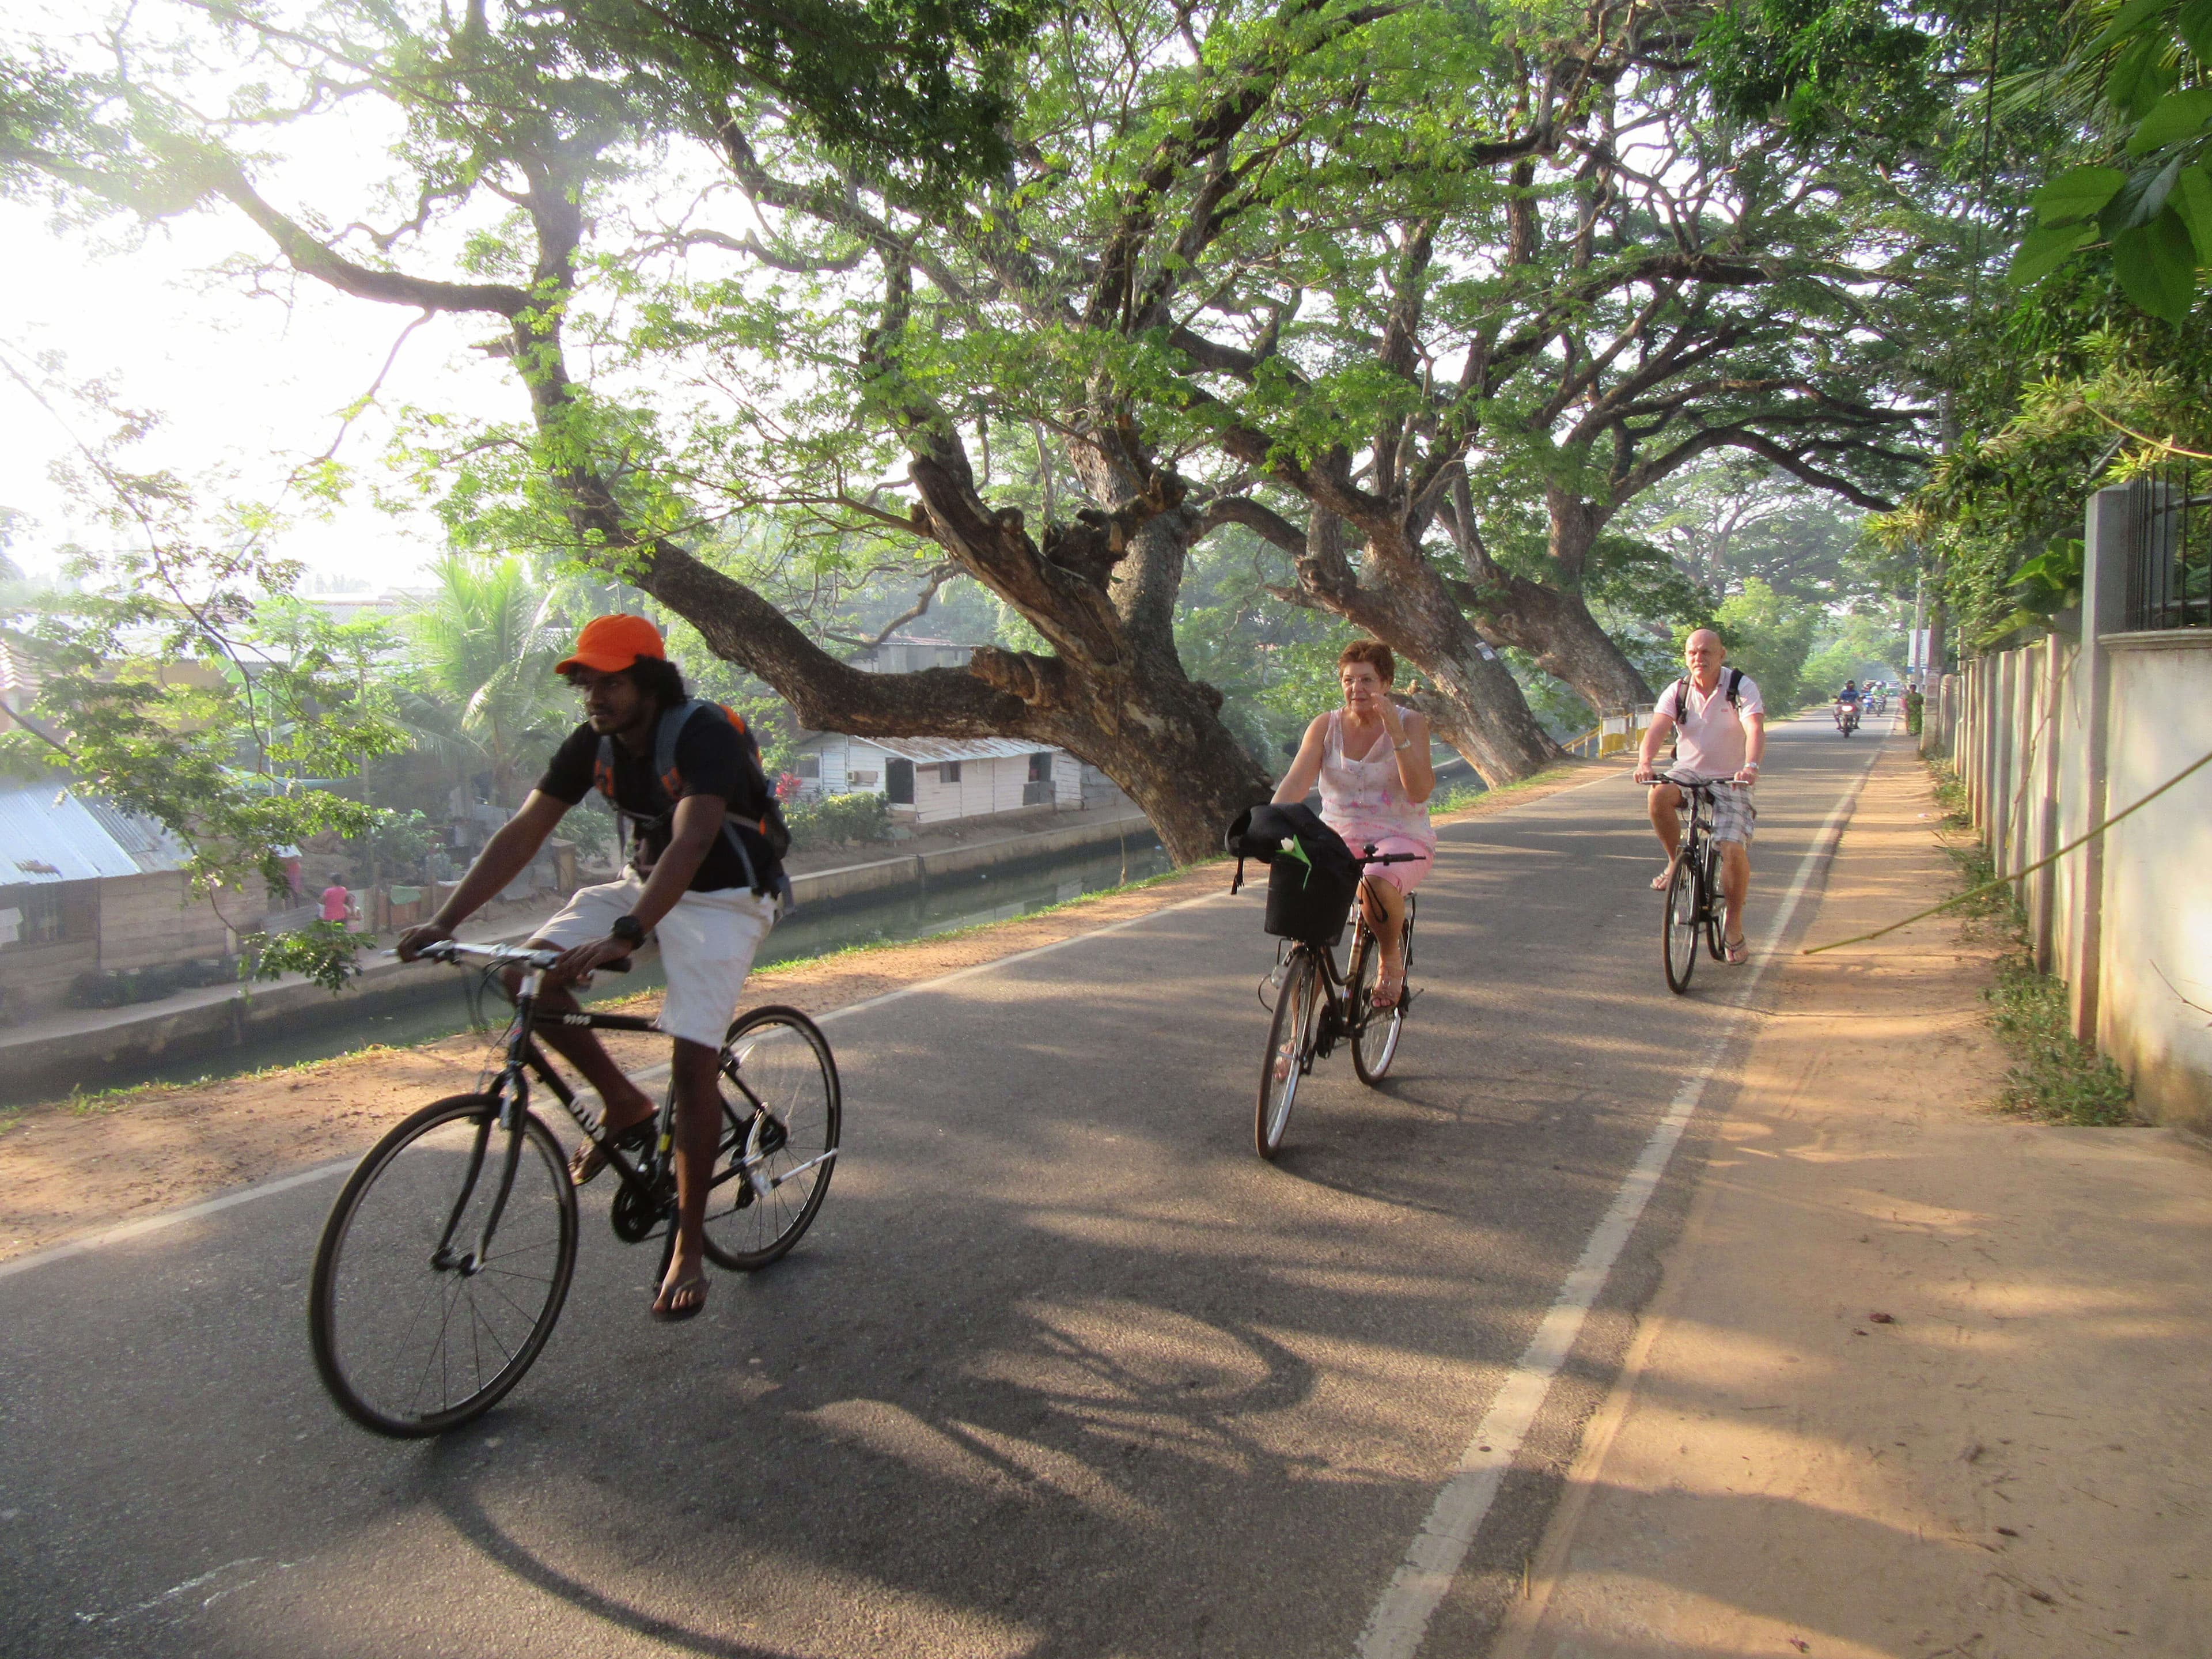 The tourists cycling under the shelter of trees in Negombo Sri Lanka